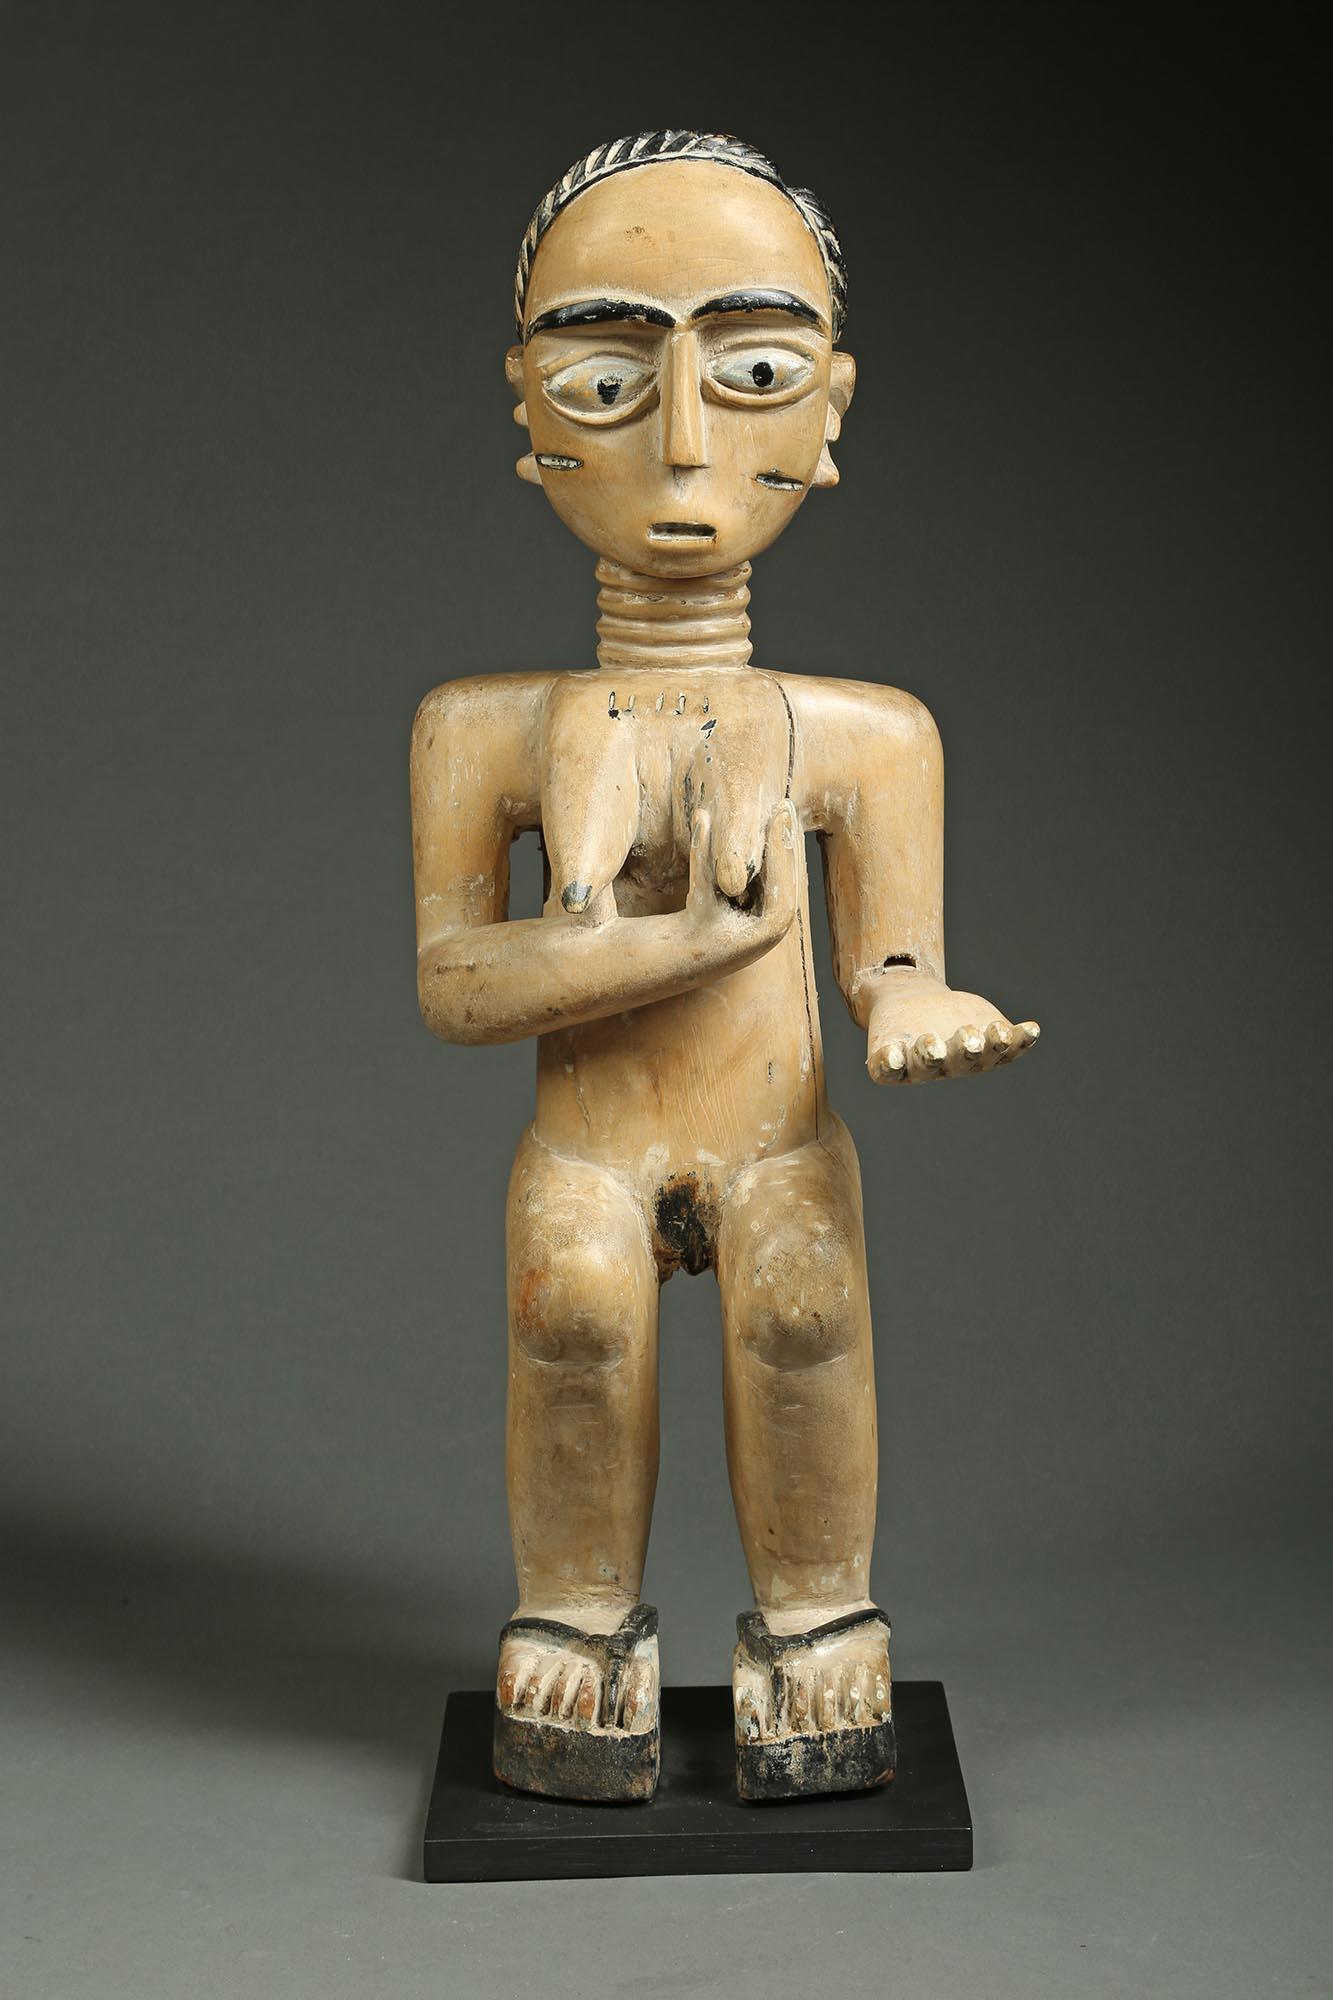 Standing Akan Ghana female figure, early 20th century, Africa.
Female figure with one hand on her breast, outstretched arm carved separately and still attached, original to the piece.
She has an expressive face with large open eyes and mouth, traces